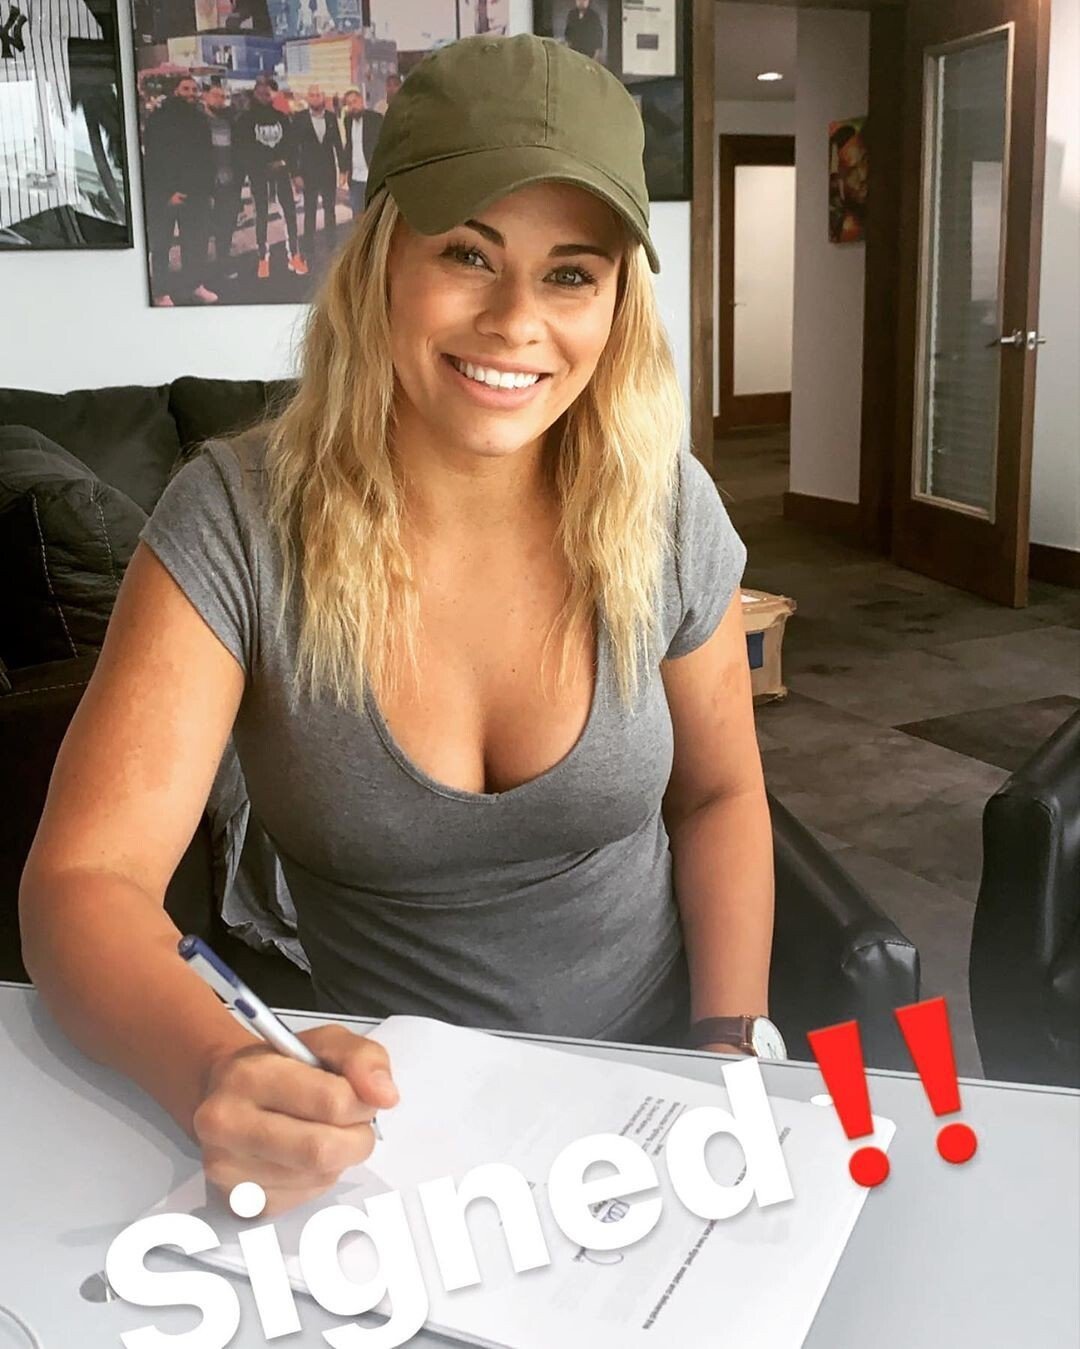 Paige VanZant signs her new Bare Knuckle FC deal. Photo: Instagram